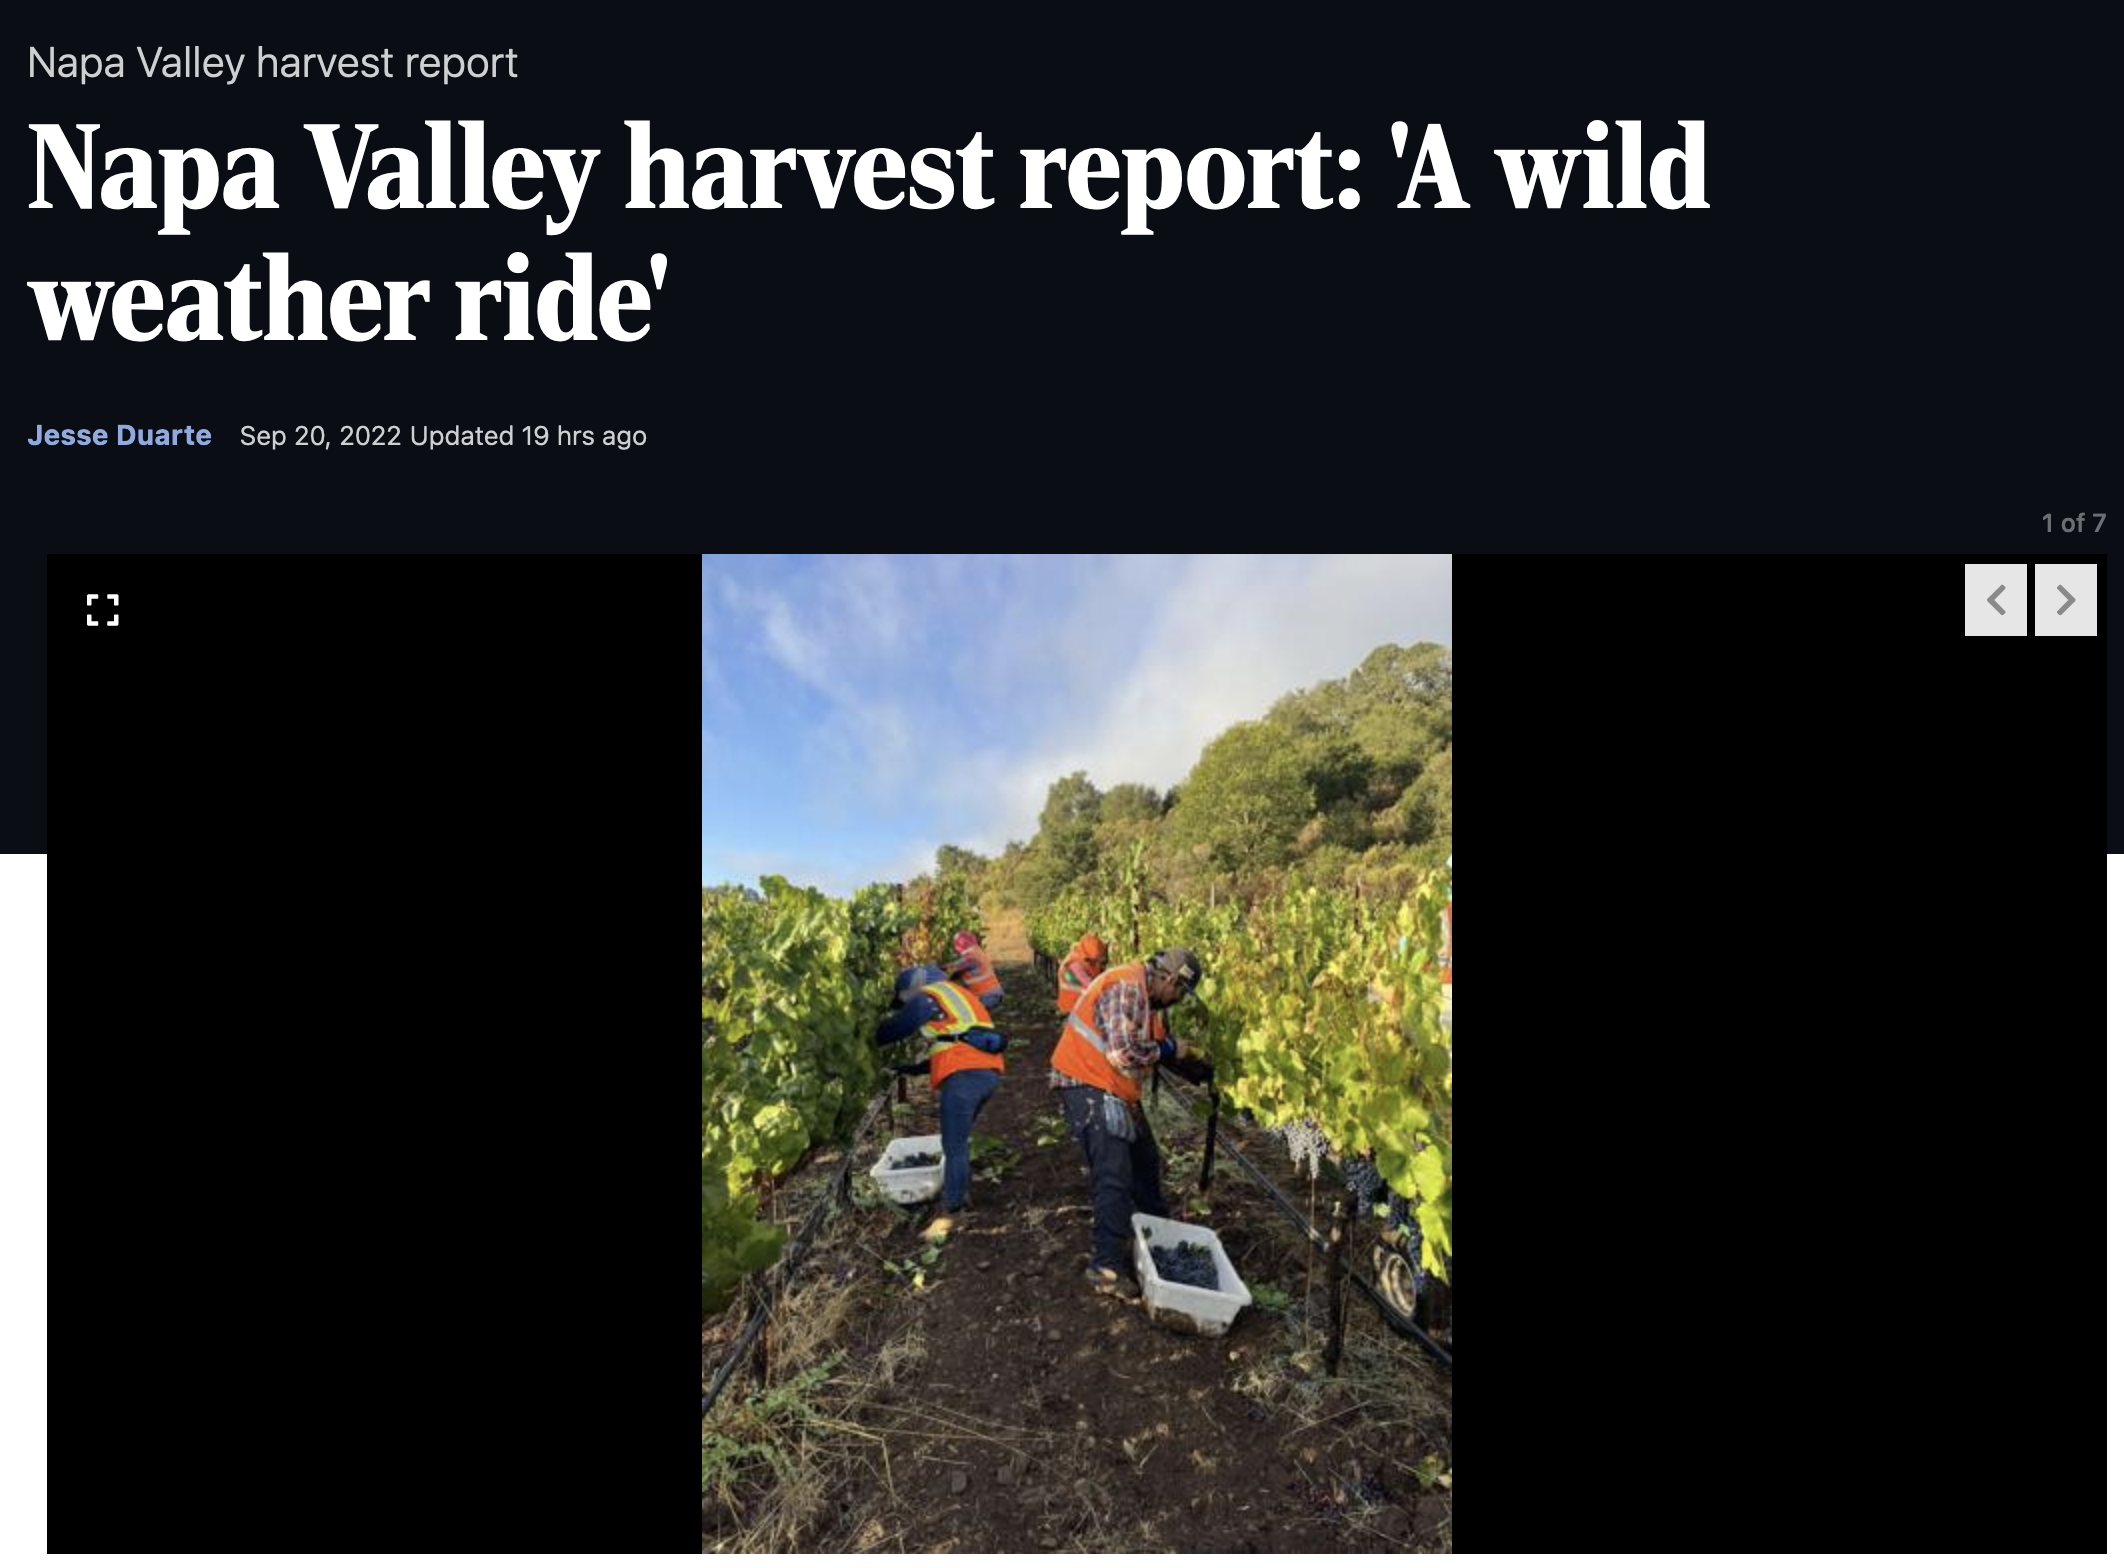 Napa Valley harvest report: ‘A wild weather ride’